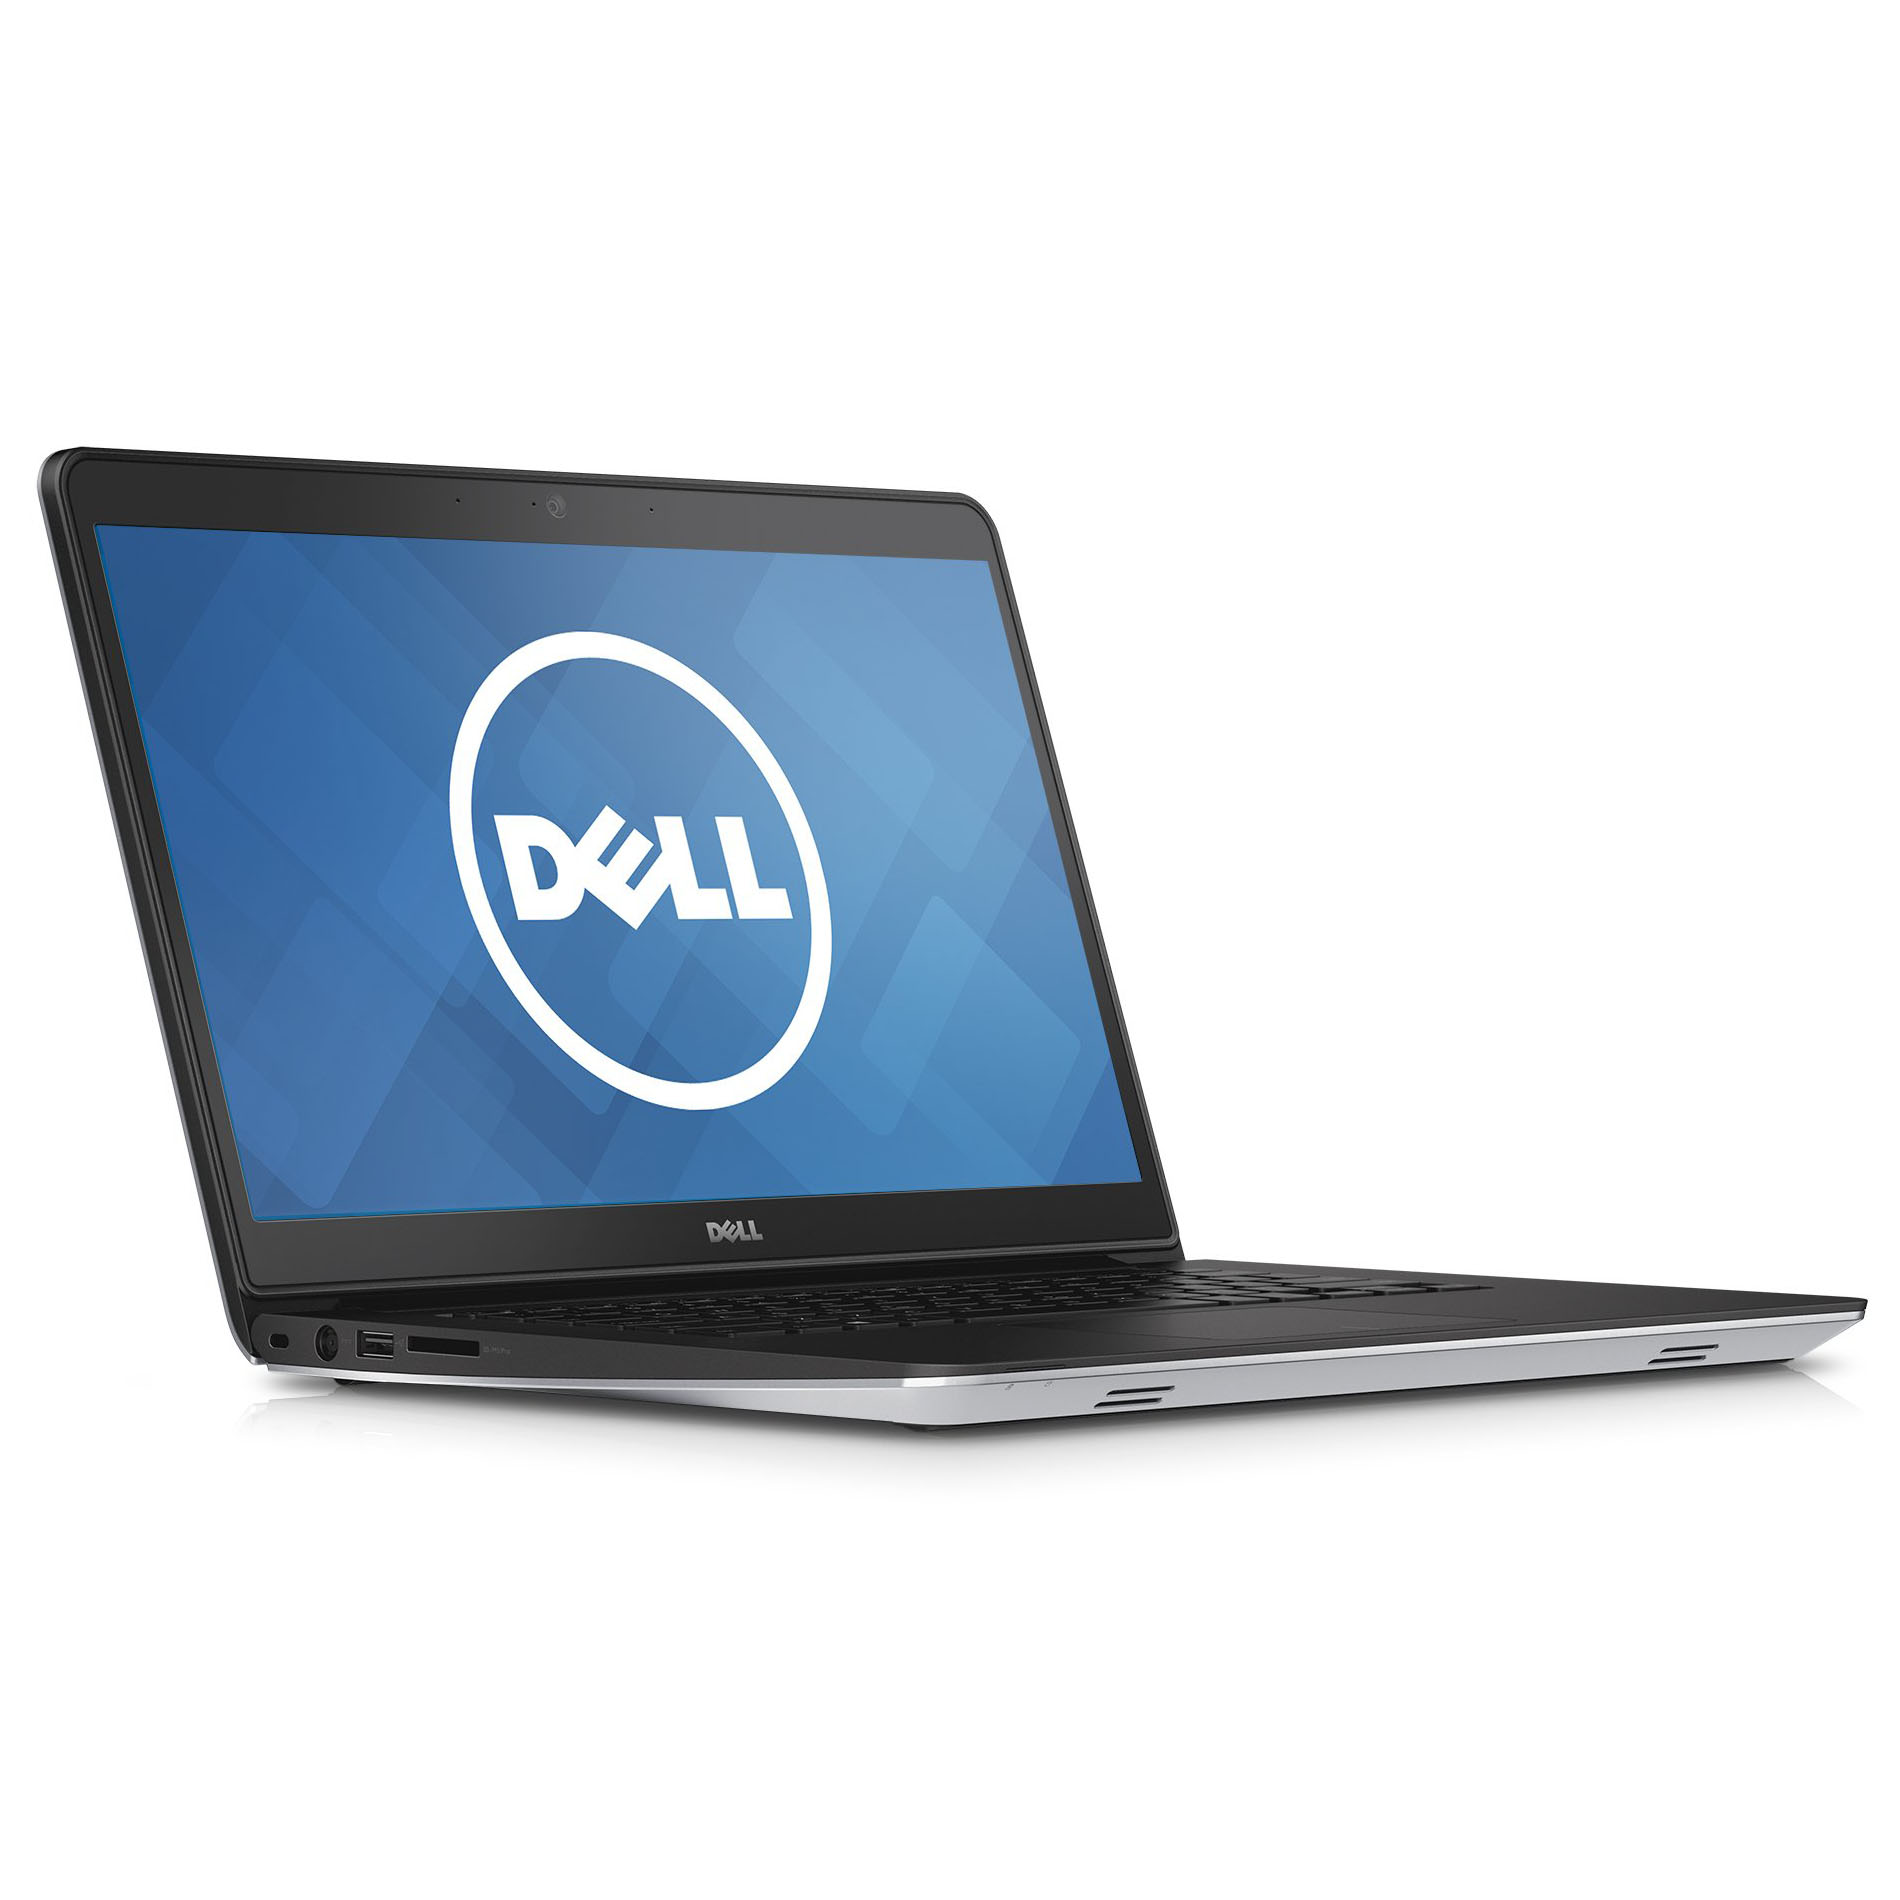 Dell Inspiron 14 5457 Notebook